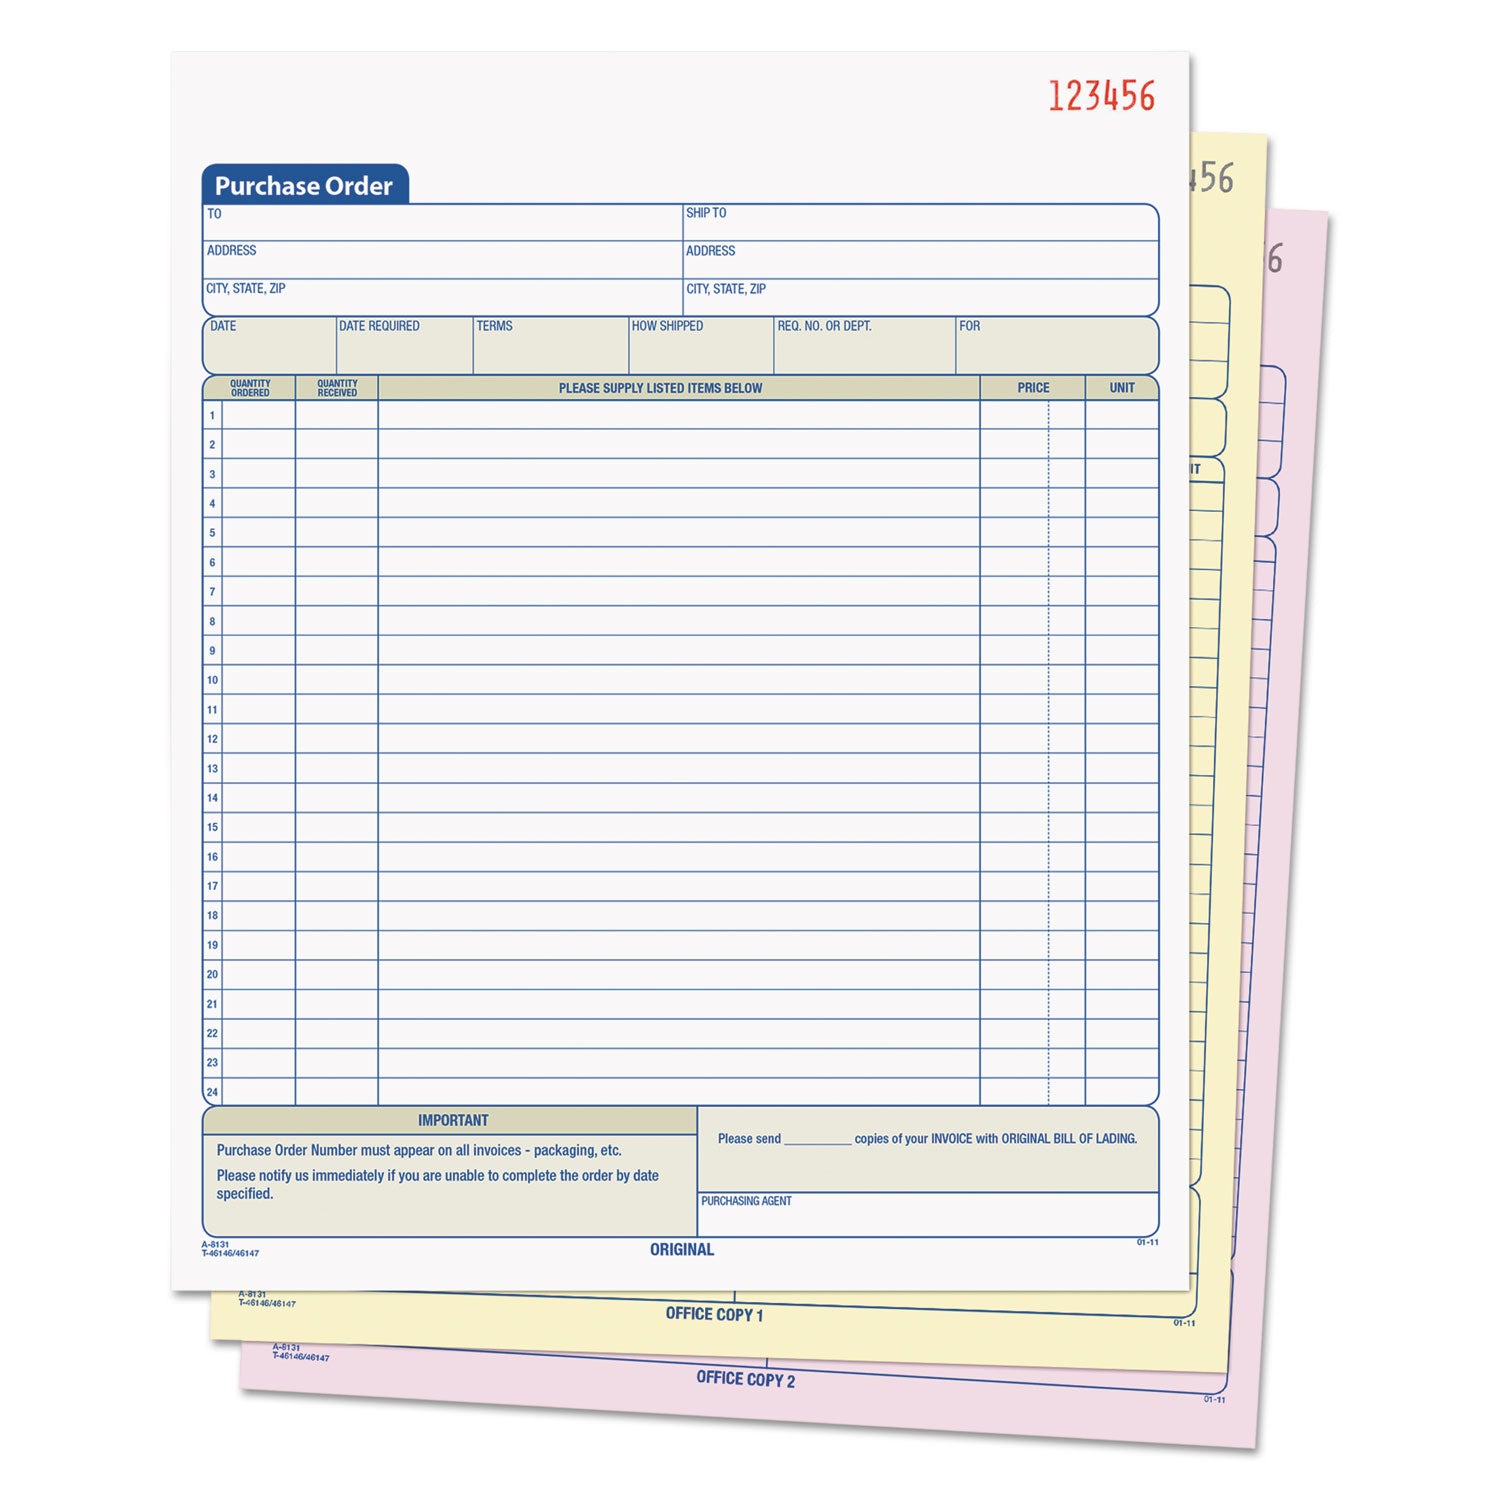 Purchase Order Book, 22 Lines, Three-Part Carbonless, 8.38 x 10.19, 50 Forms Total - 